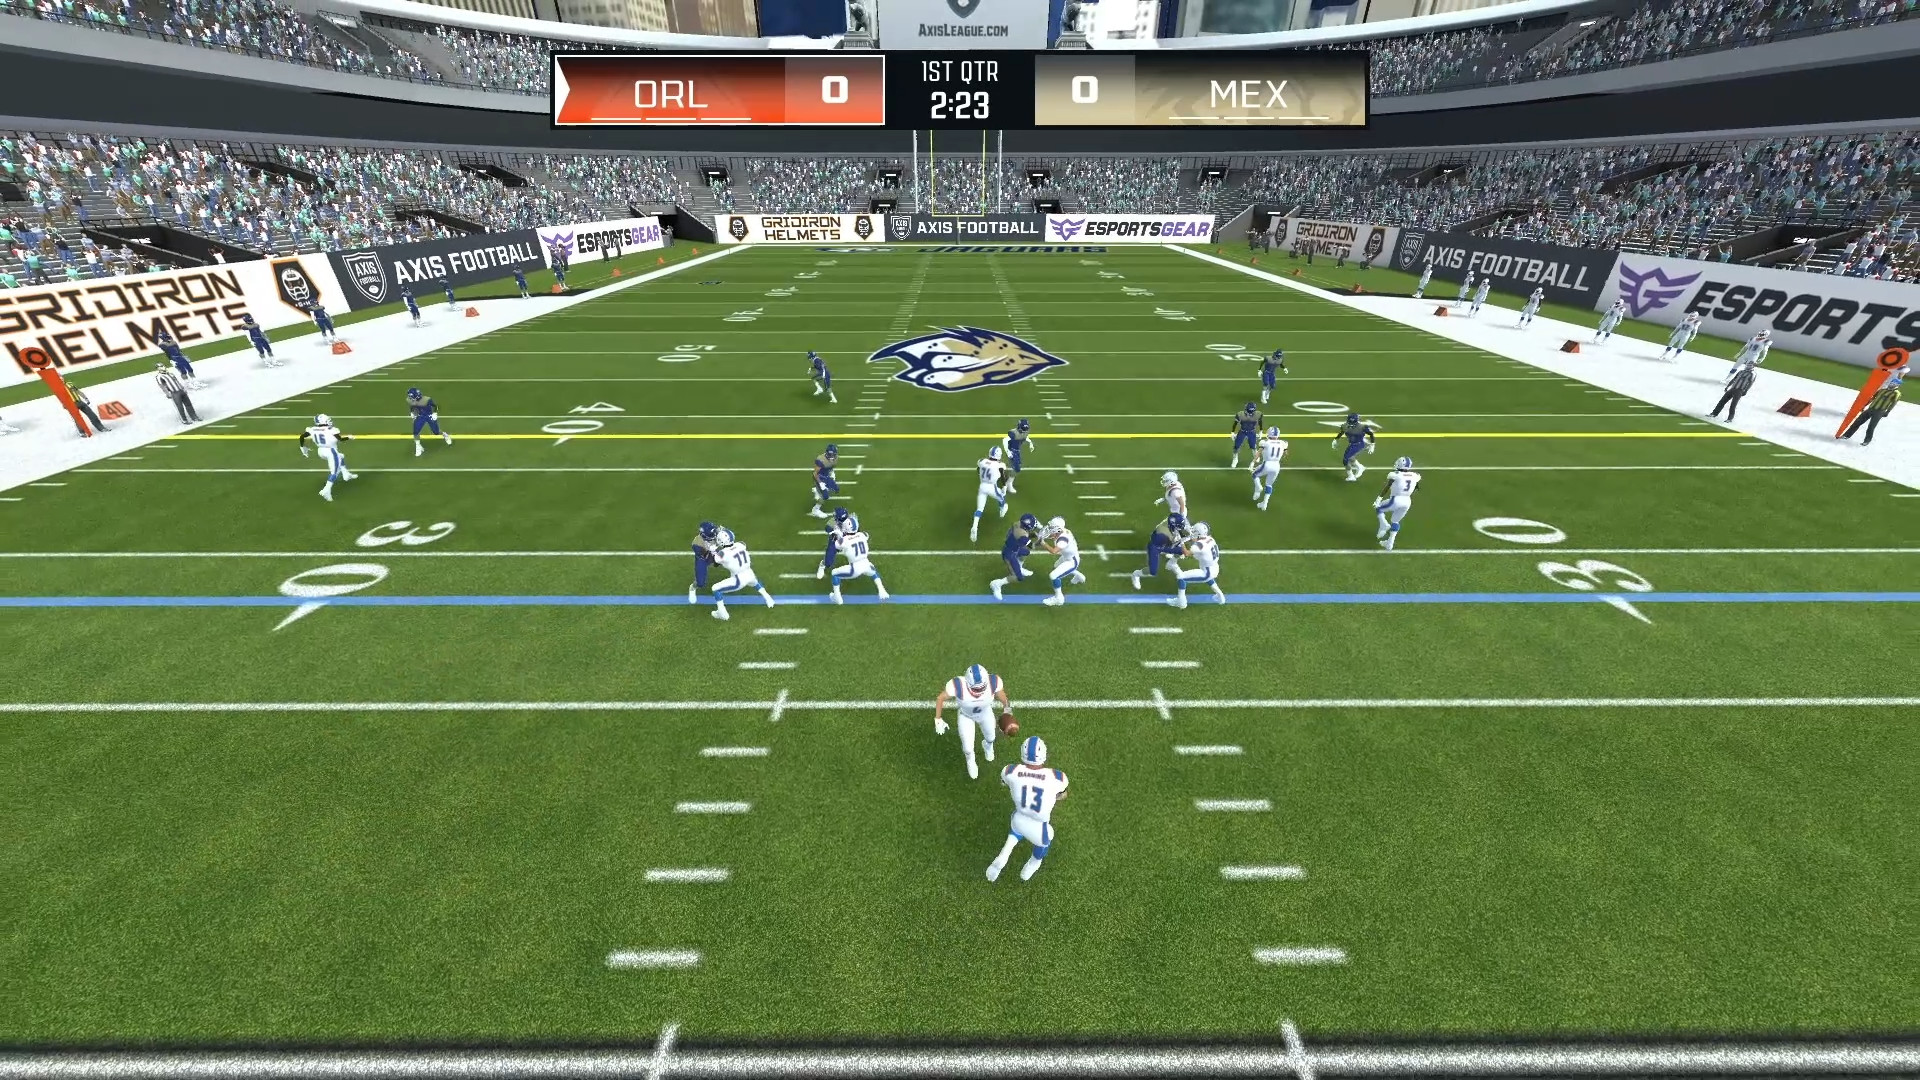 Axis Football 2020 Free Download